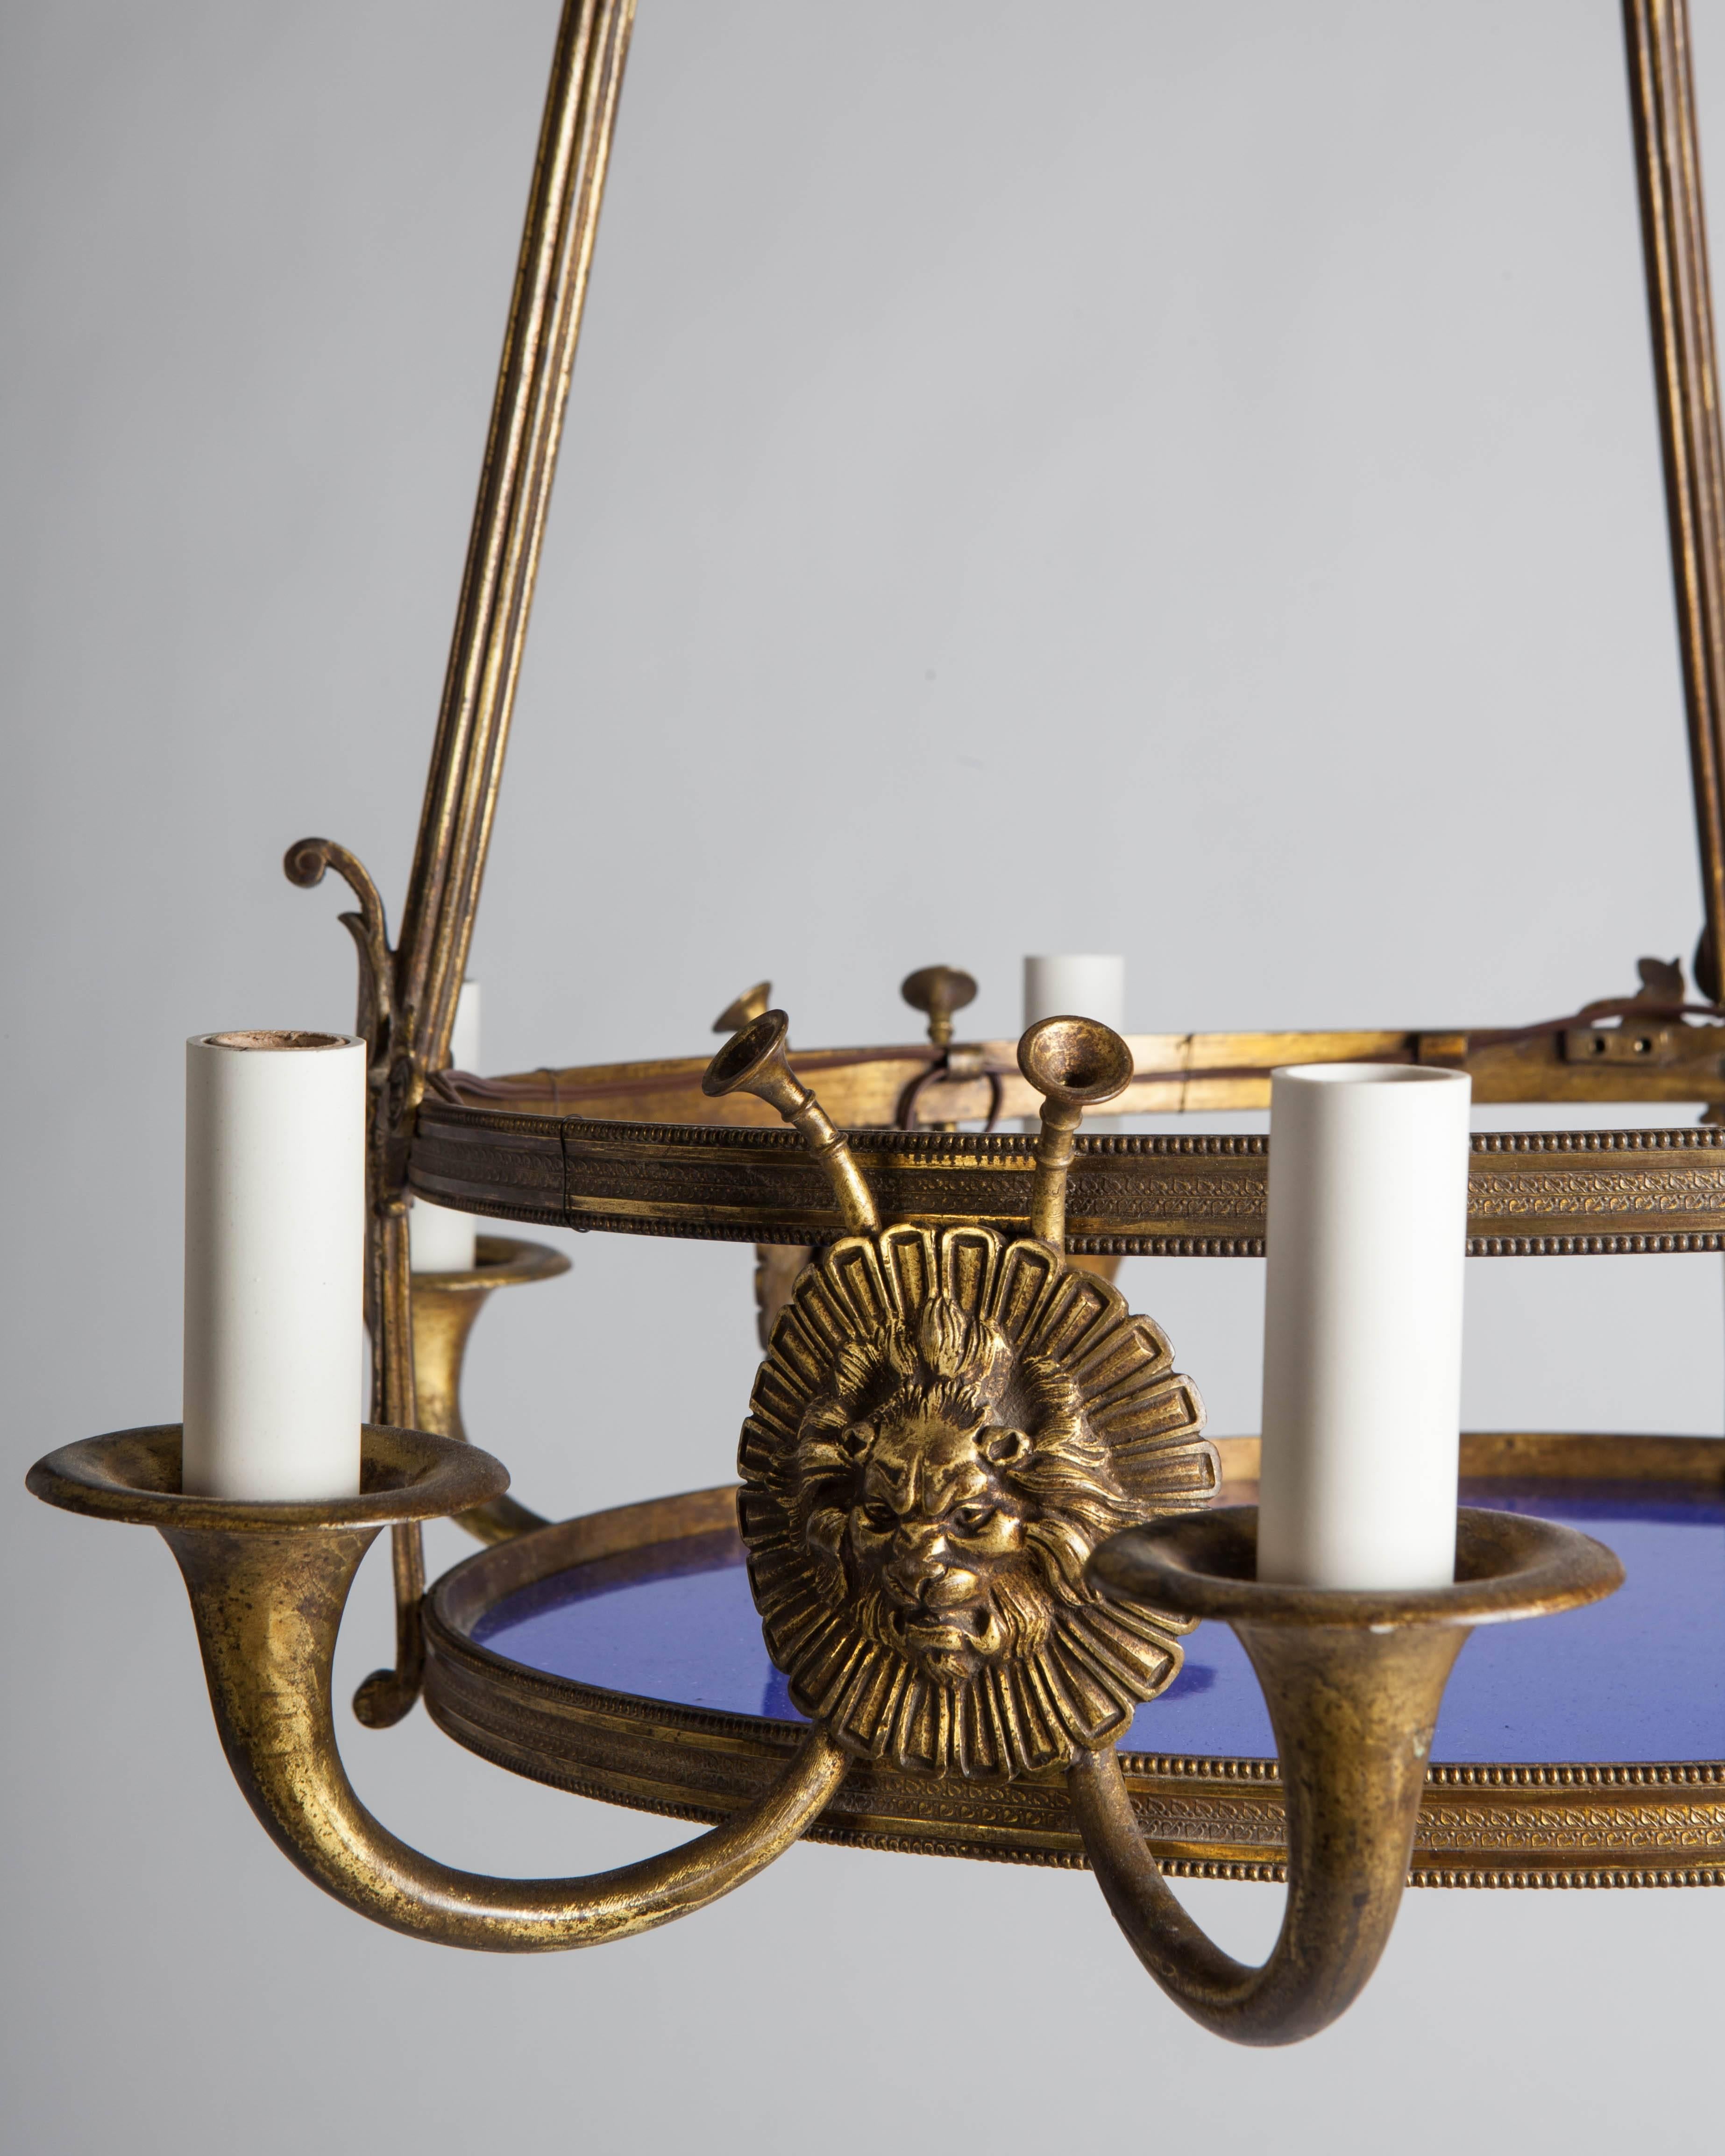 AHL3927

An antique bronze chandelier having a cobalt blue lens. Three pairs of arms issue from behind lion masks. The whole in its original worn gilded brass finish. Due to the antique nature of this fixture, there may be some nicks or